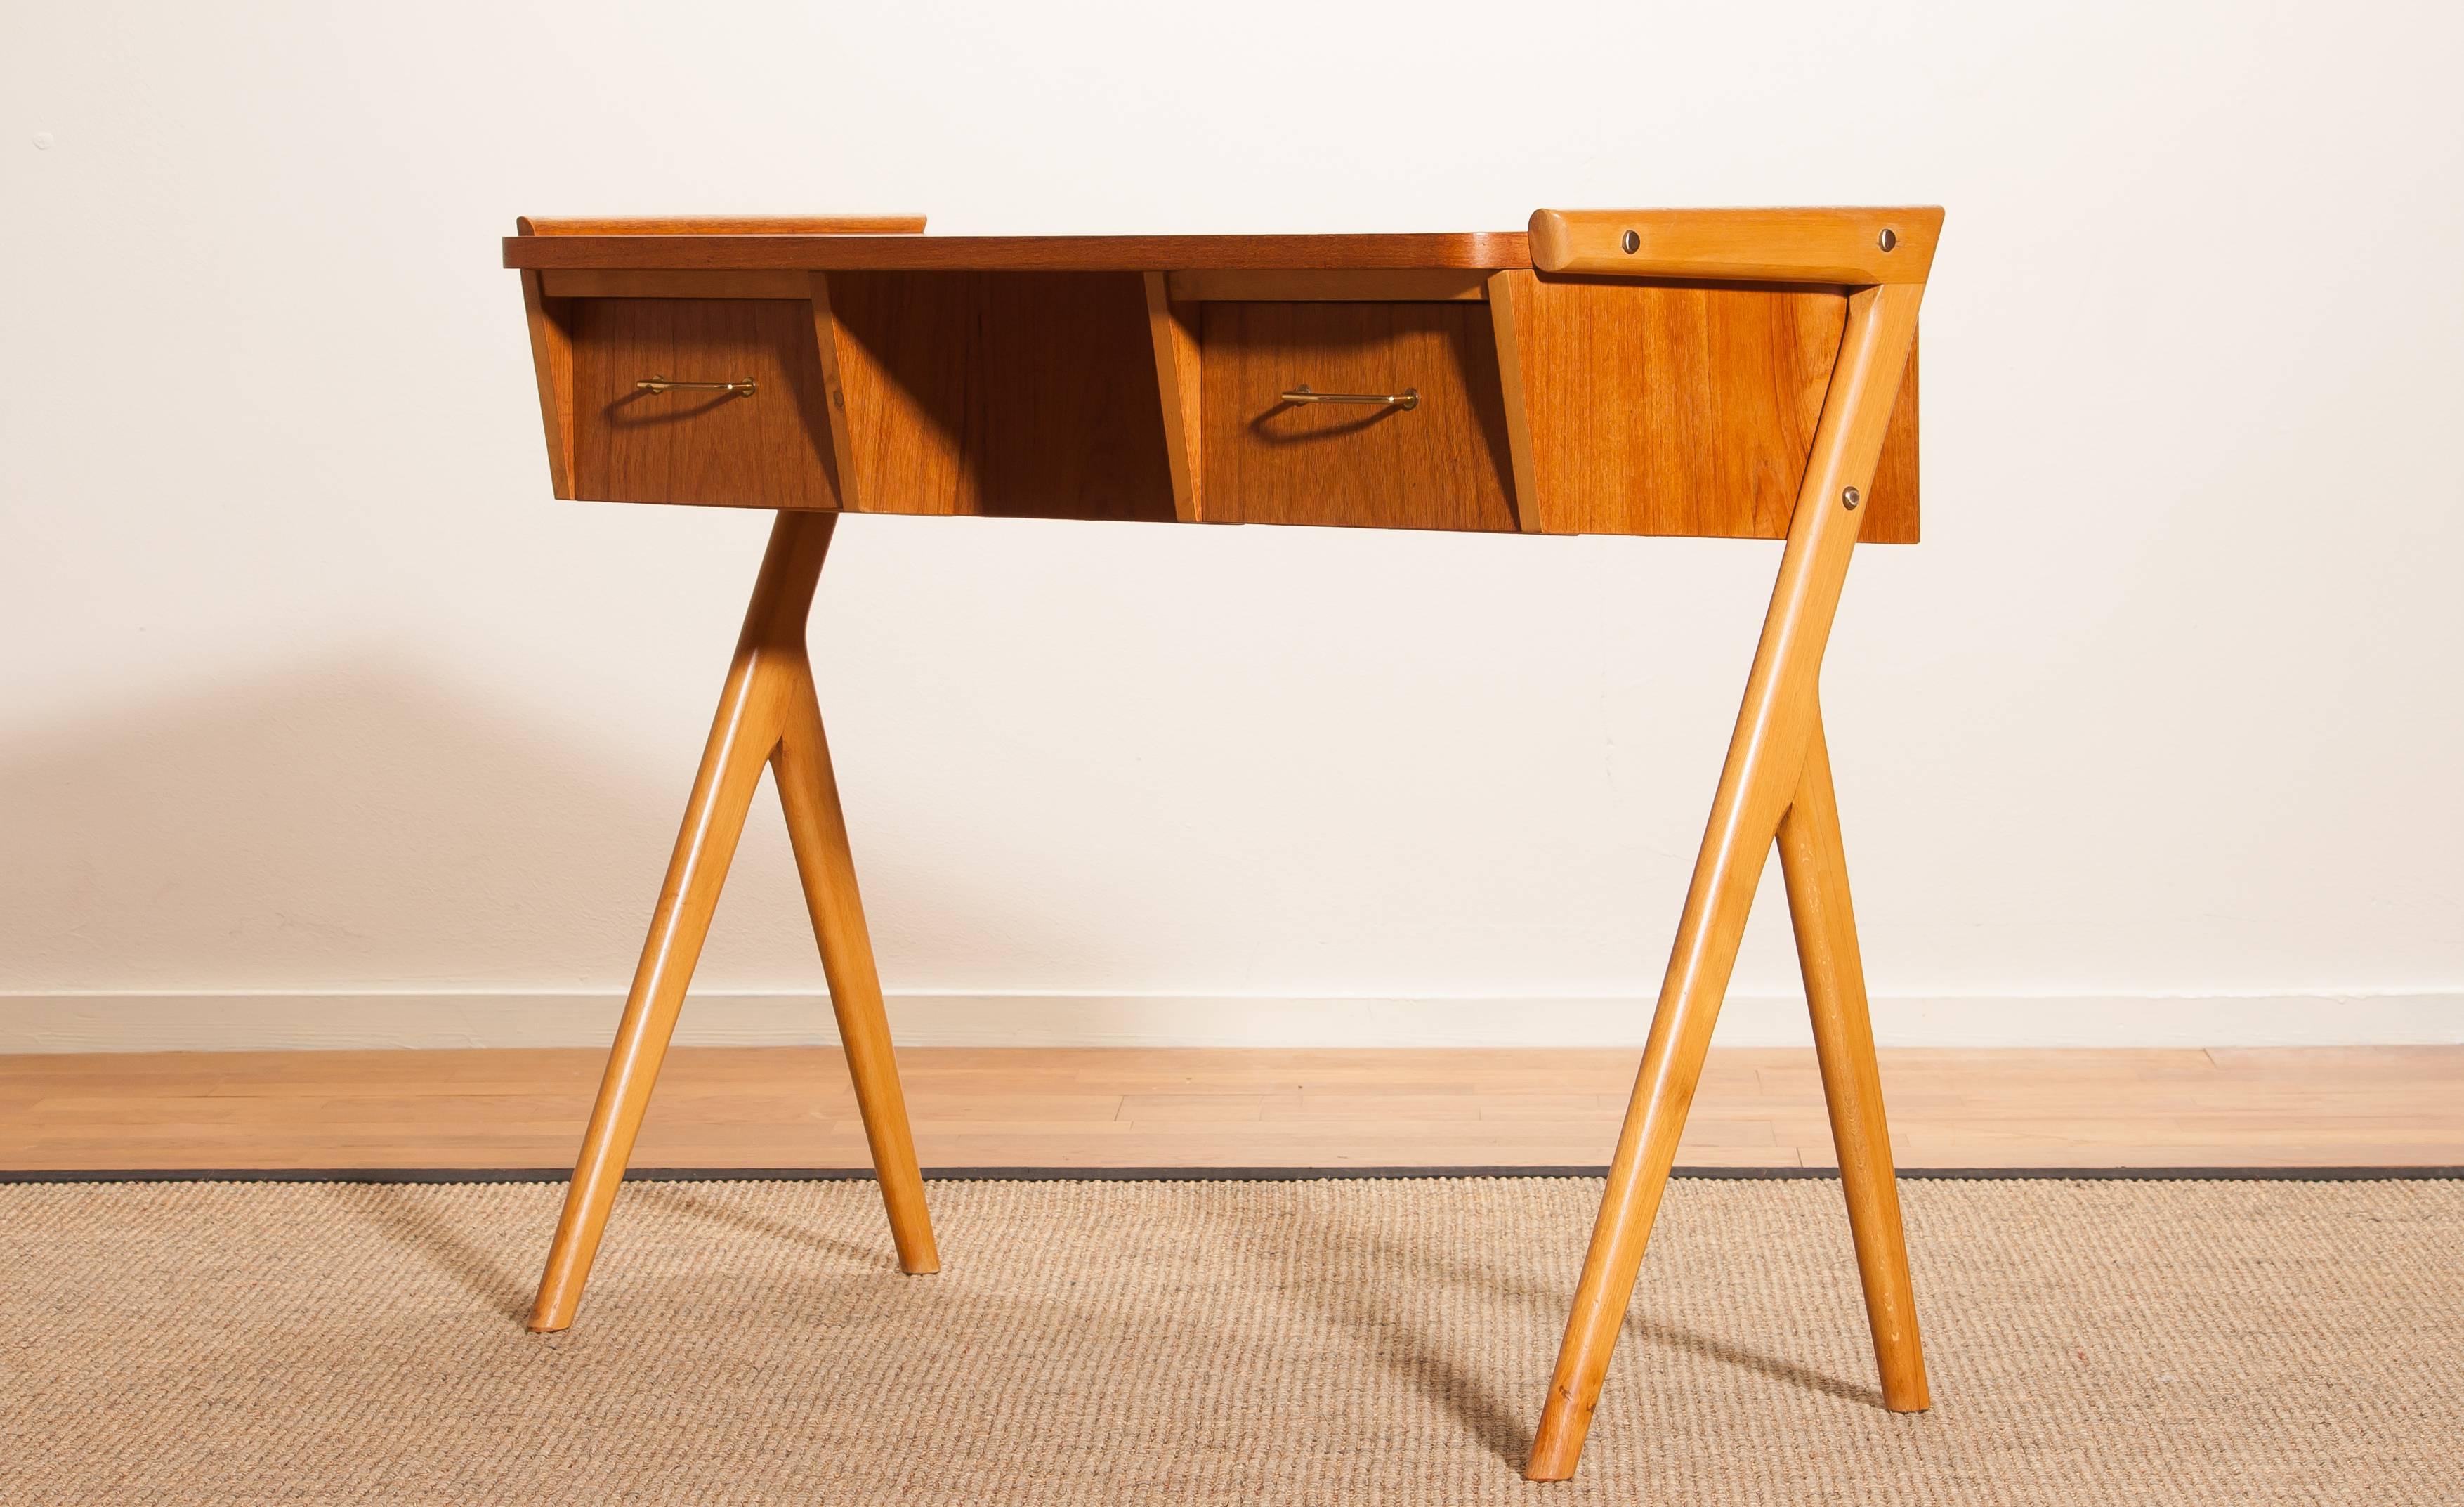 Very beautiful ladies desk from Sweden
The table is made of teak and has two drawers with brass details.
It is in a very nice condition.
Period 1950s
Dimensions H. 70 cm, W. 84cm, D. 40 cm.